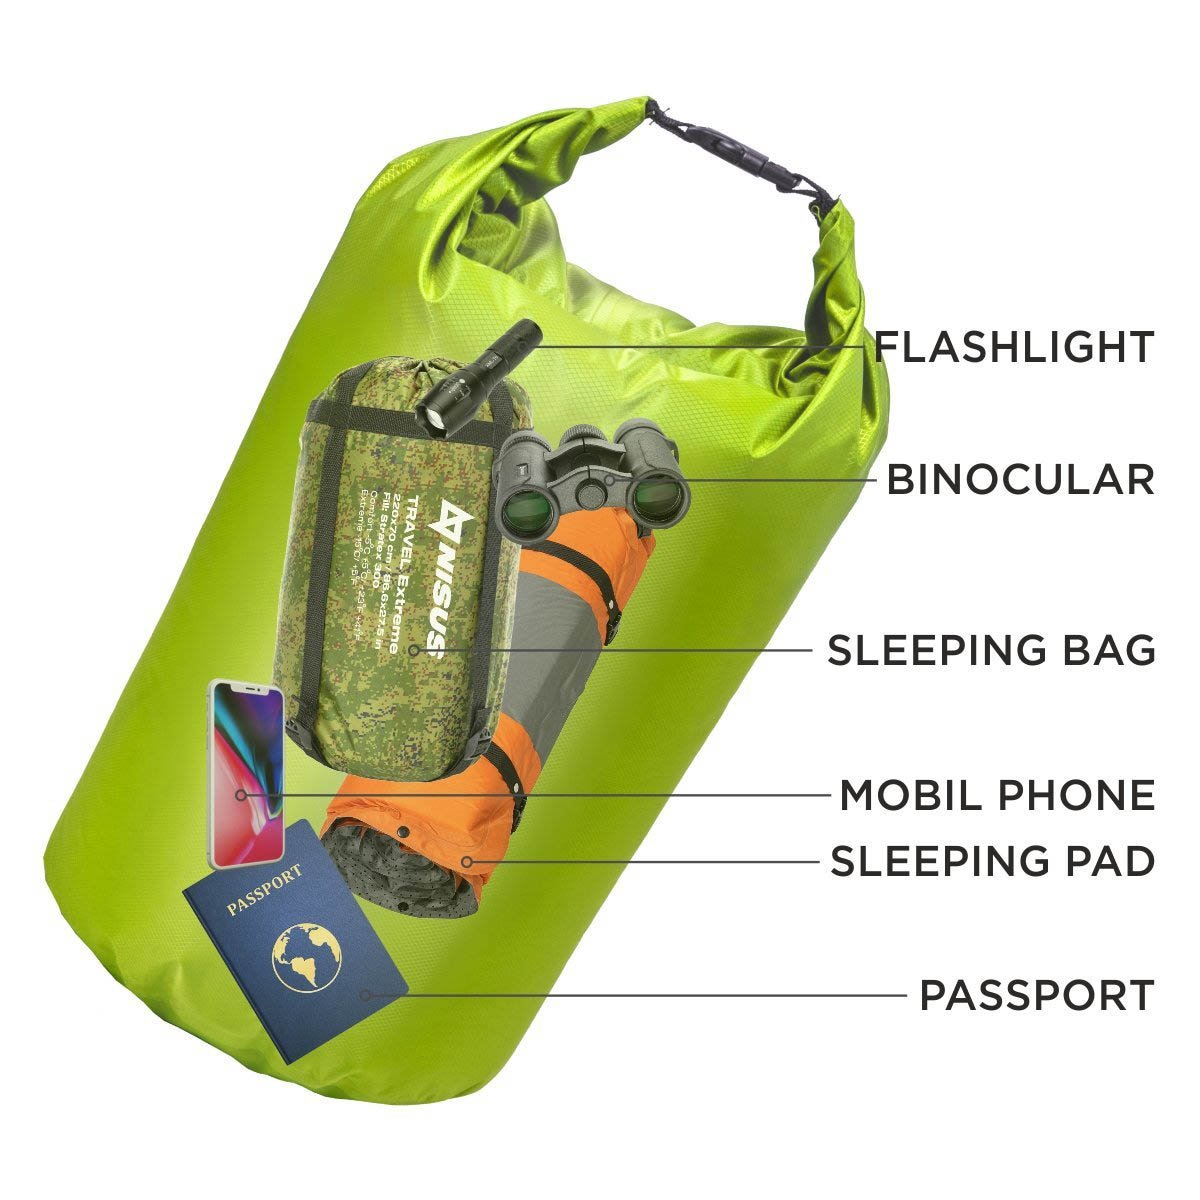 You could store flashlight, a binocular, a sleeping bag, a sleeping pad, documents and mobile phone into the 20 L Green Polyester Waterproof Dry Bag for Fishing, Kayaking with no risk